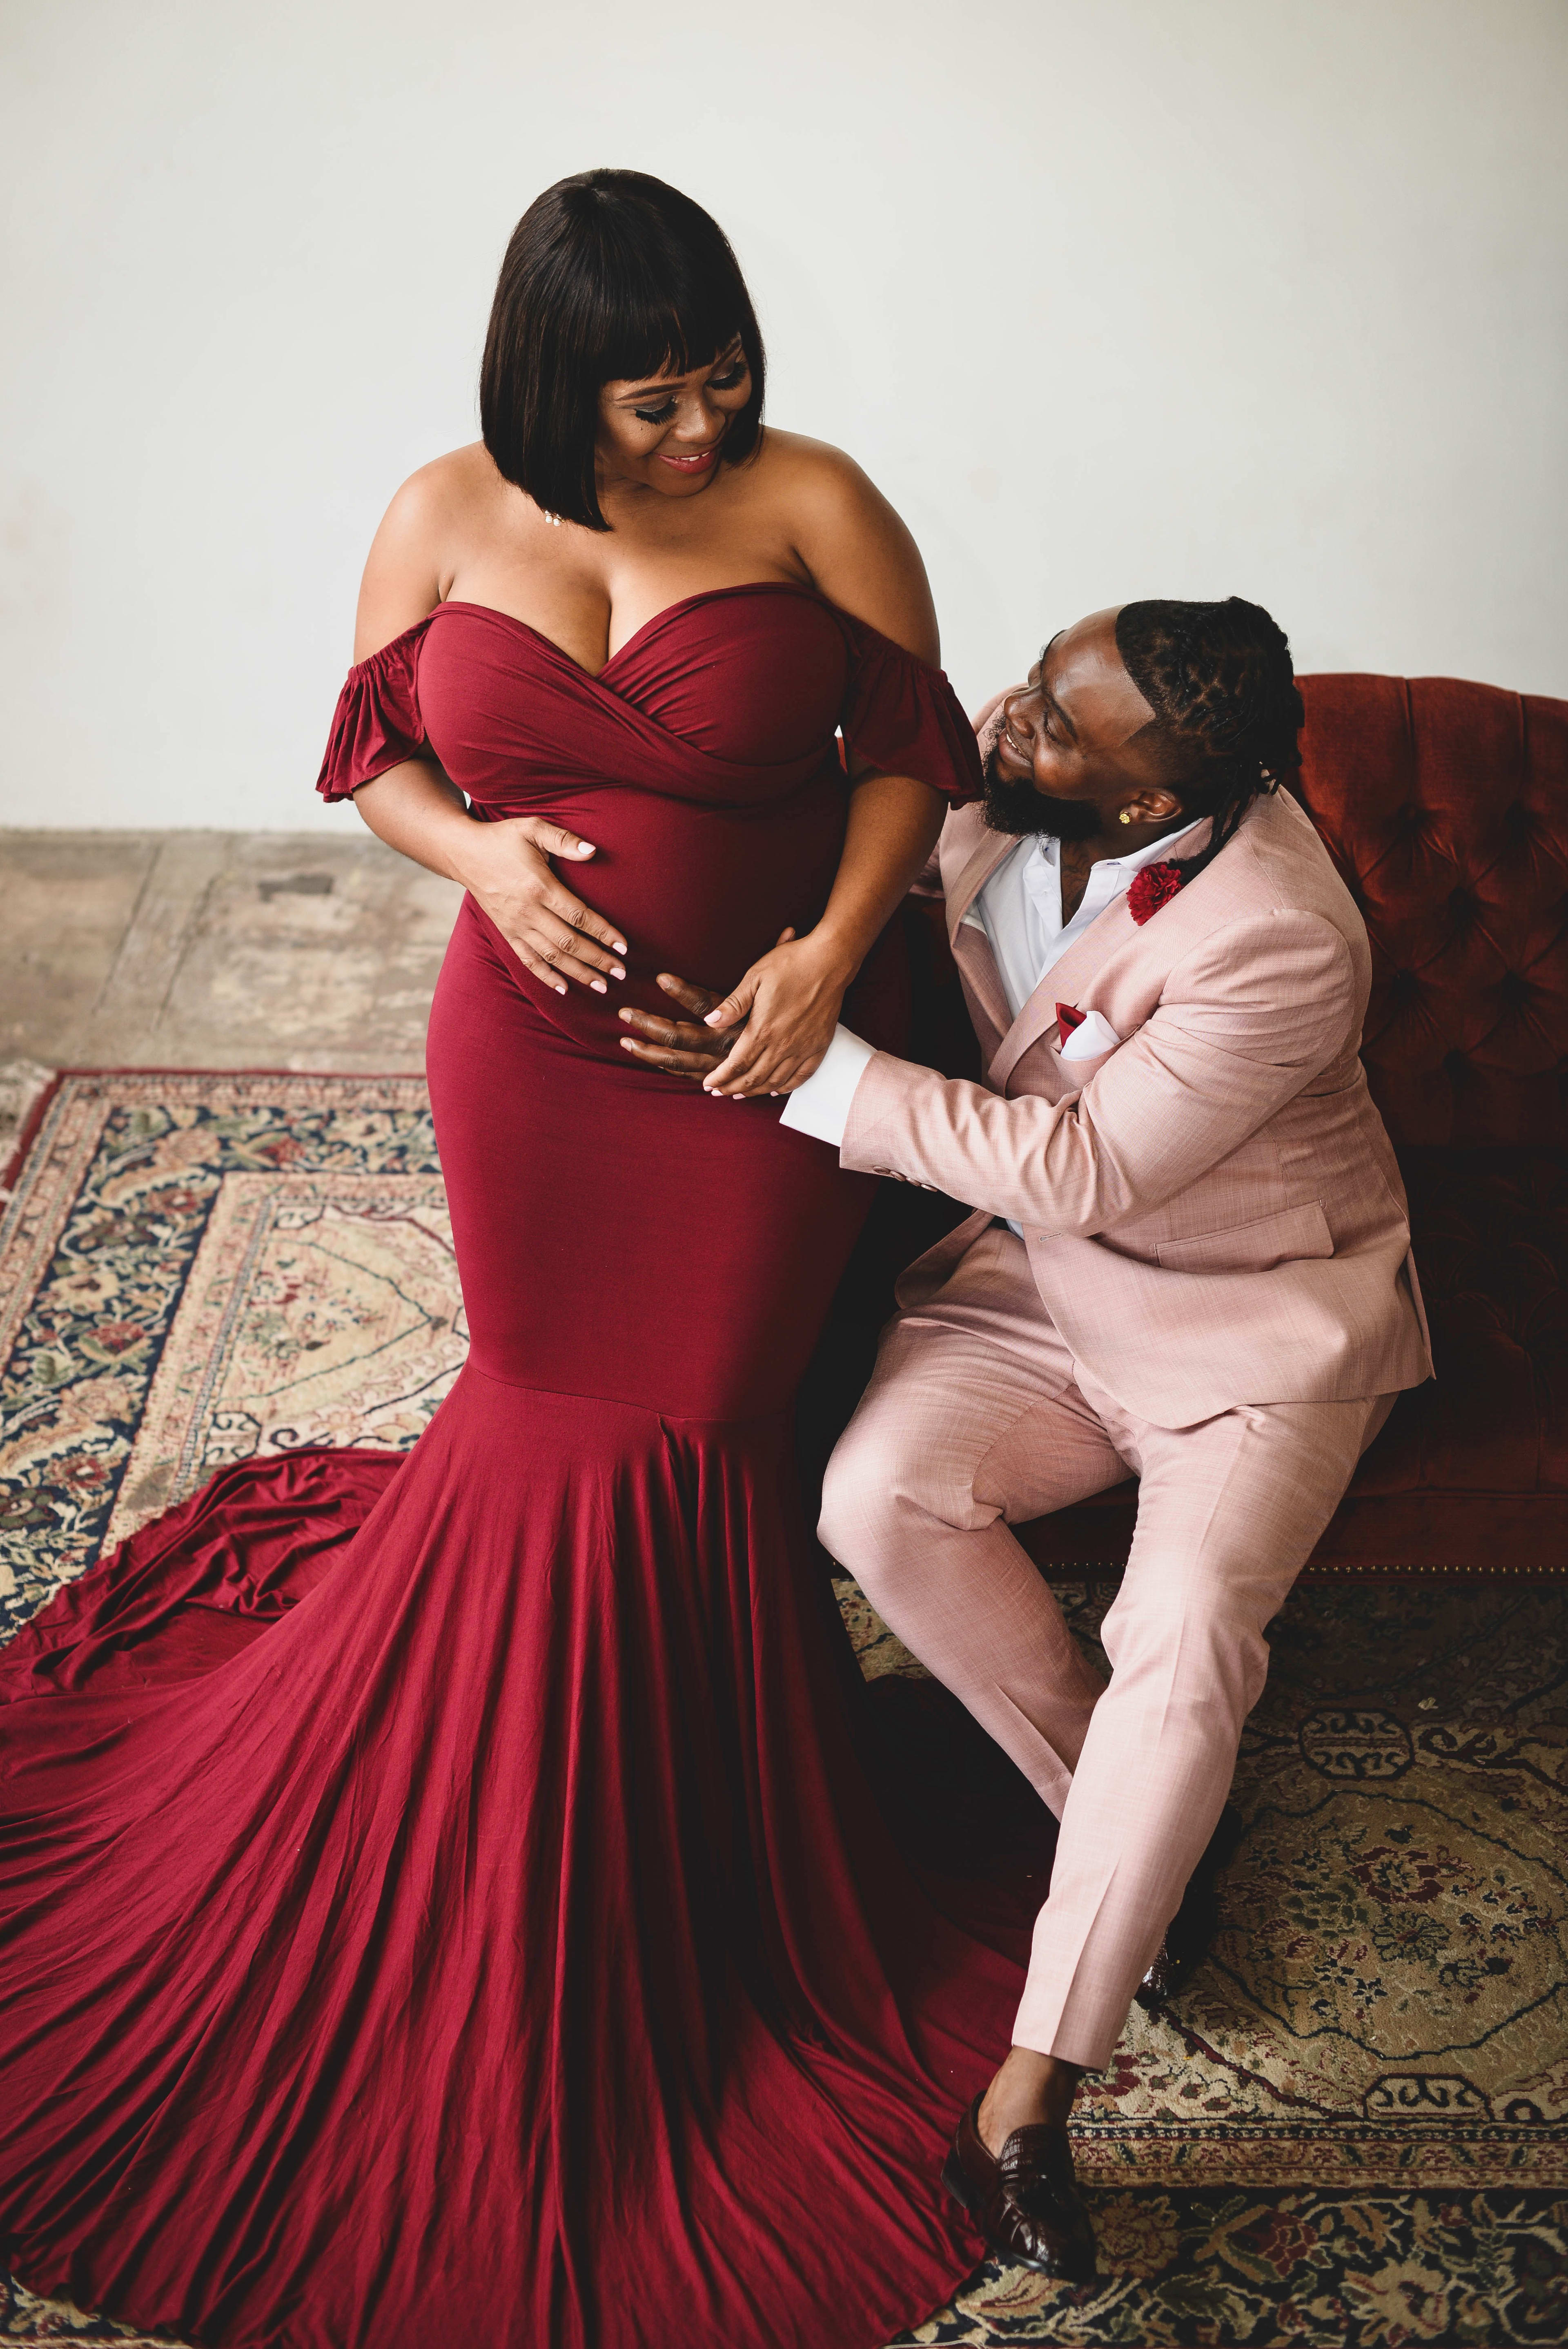 A pregnant woman and her partner posing in a red dress and pink suit for a maternity photo shoot.